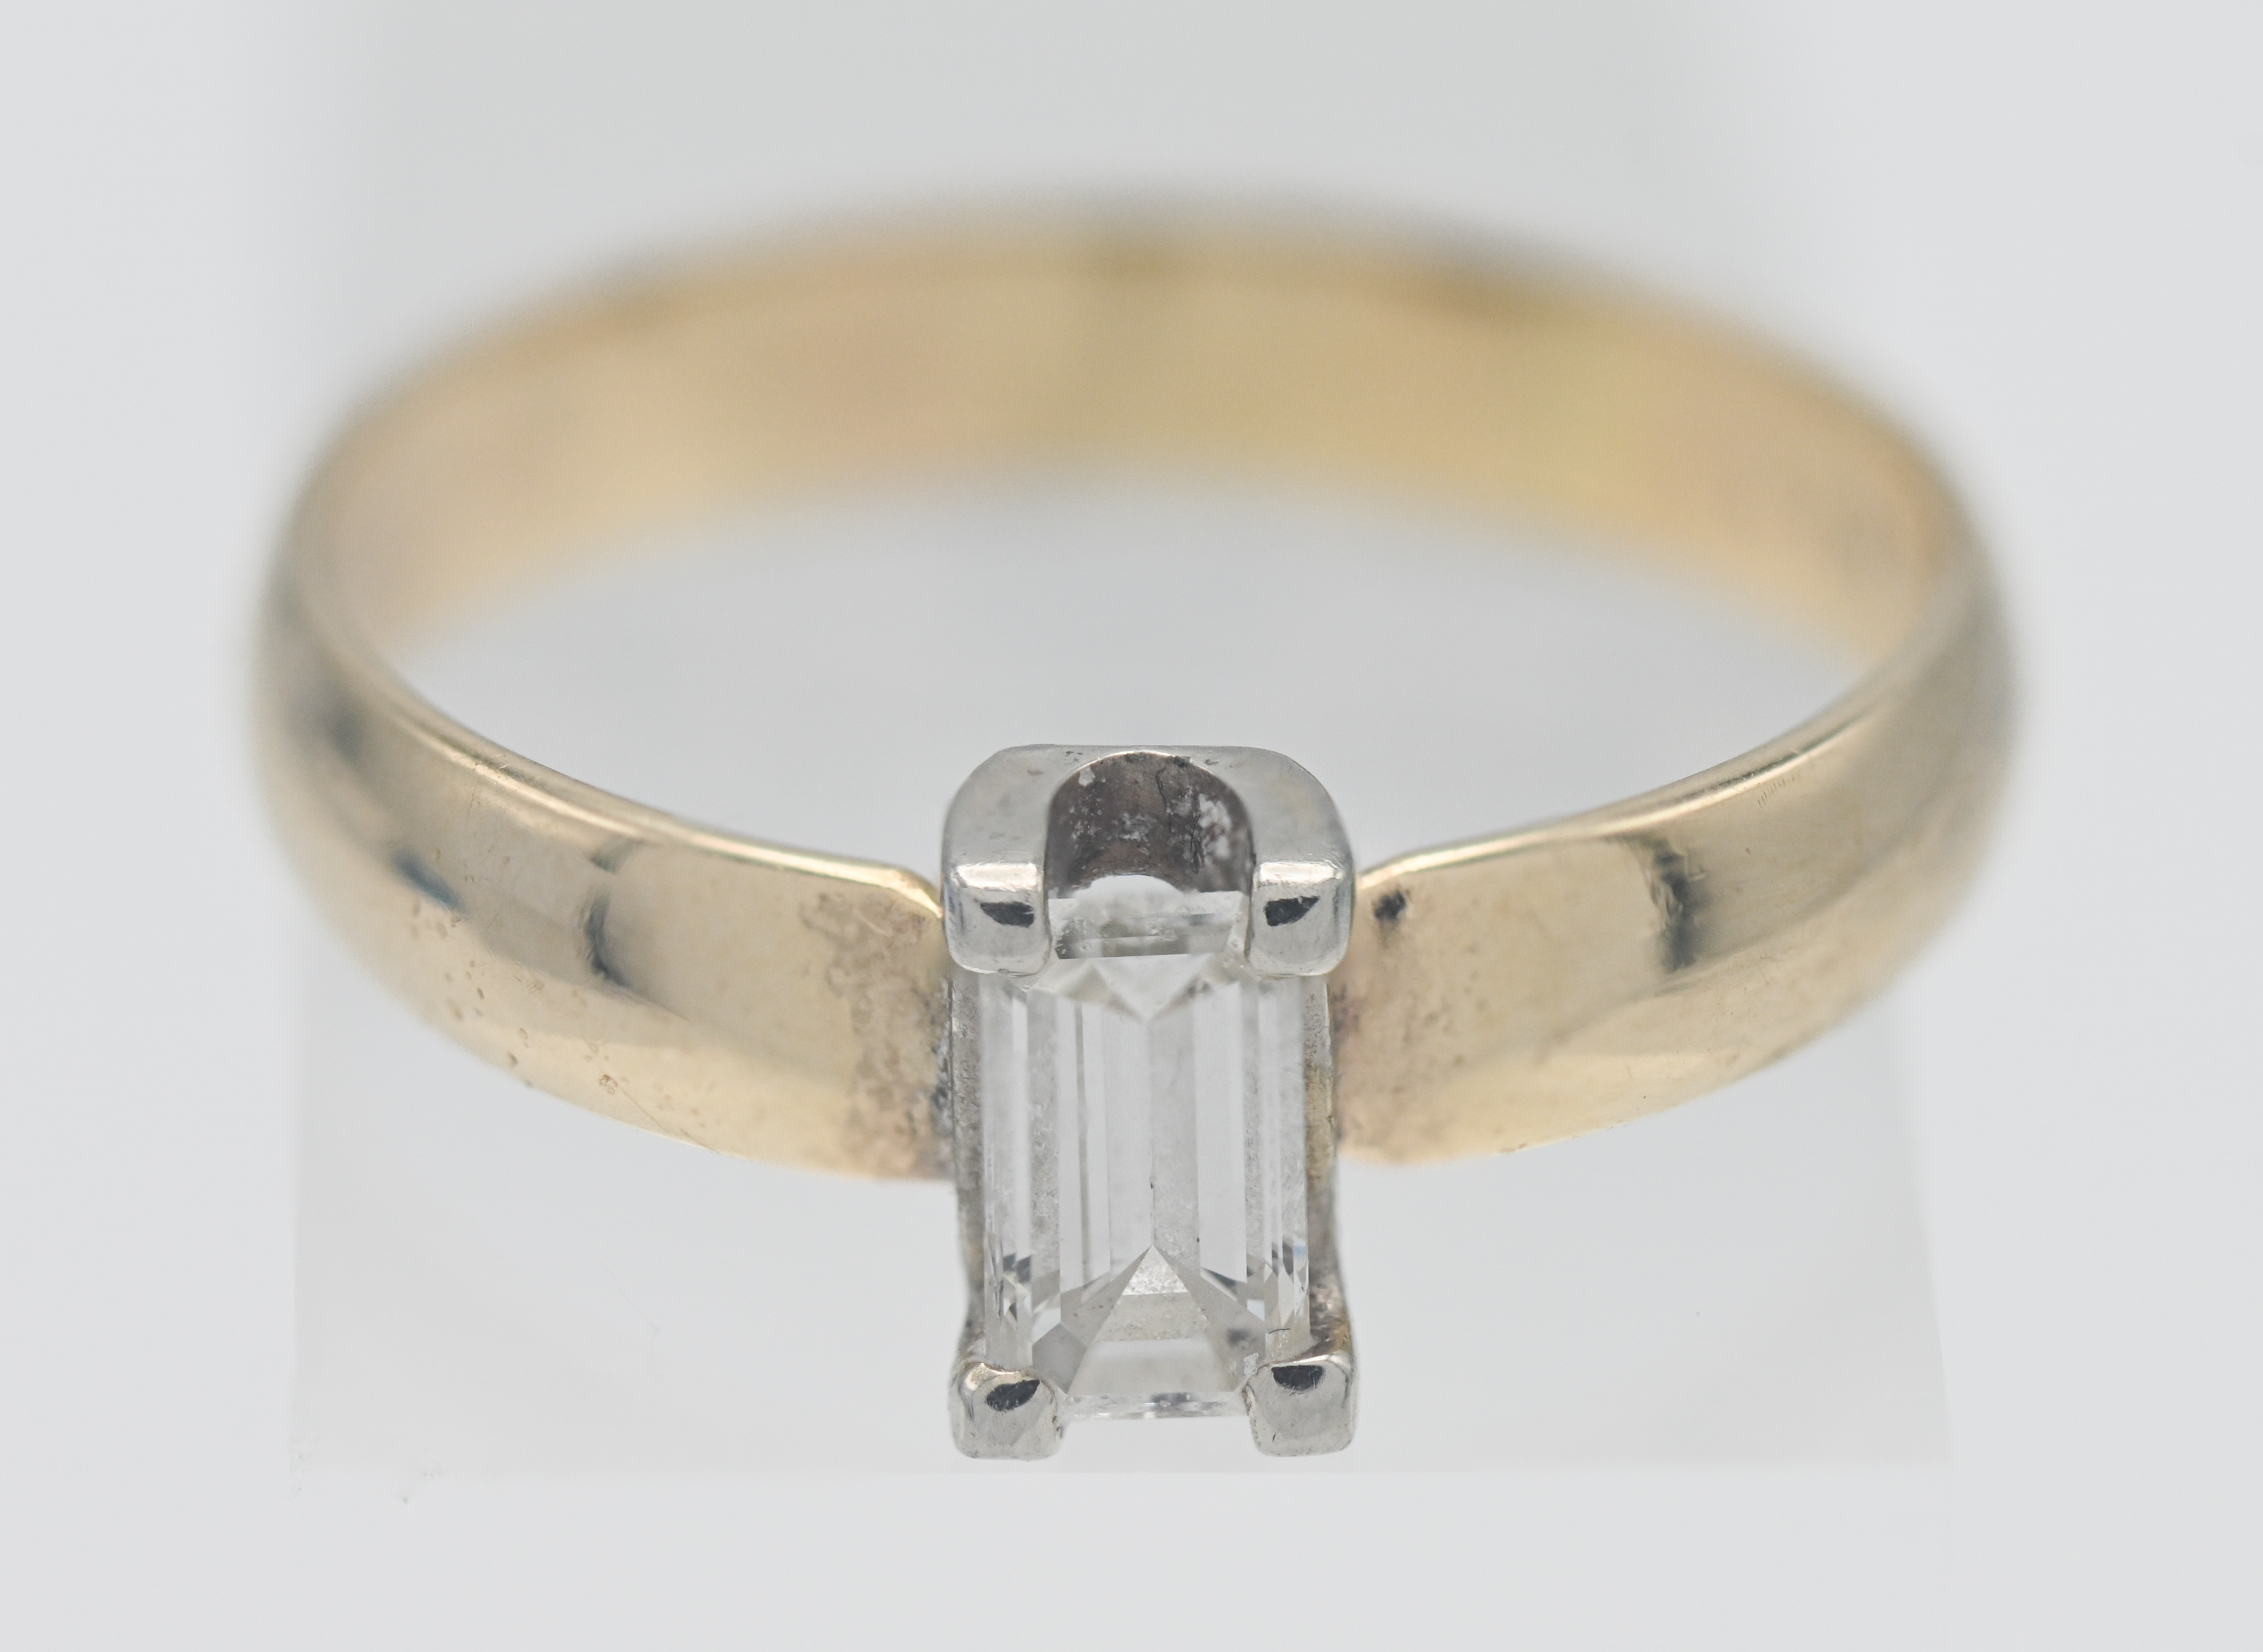 A 14k gold and emerald cut diamond ring, size T.